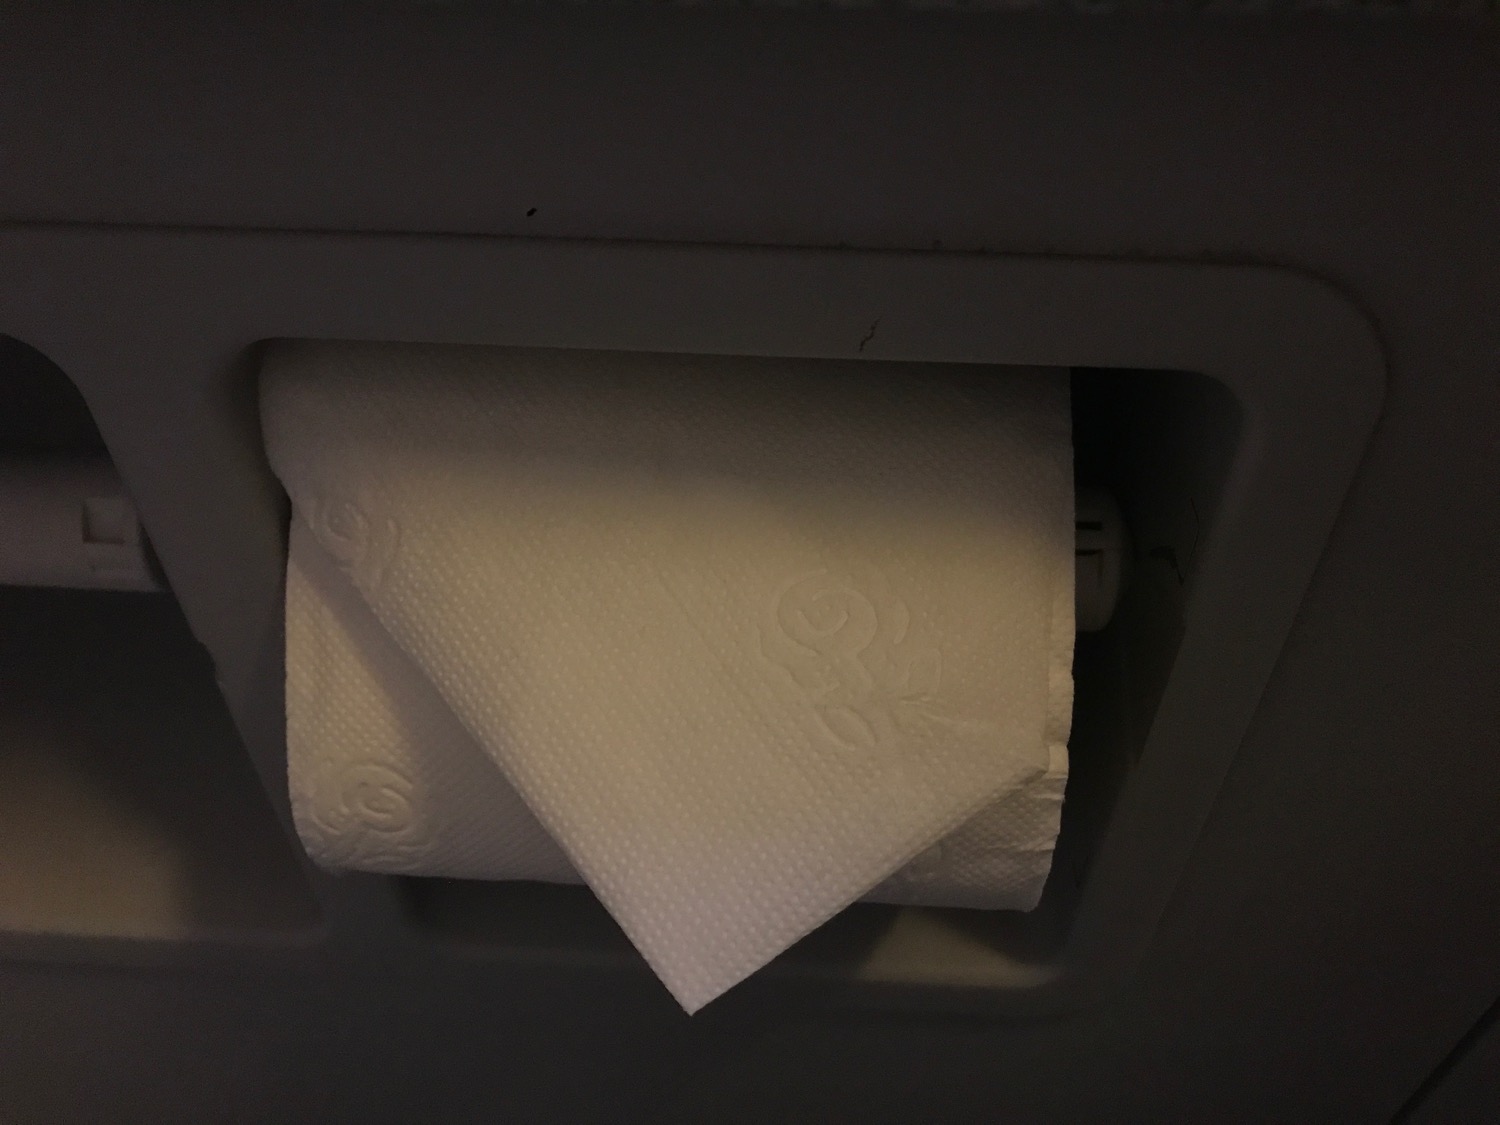 a roll of toilet paper in a holder